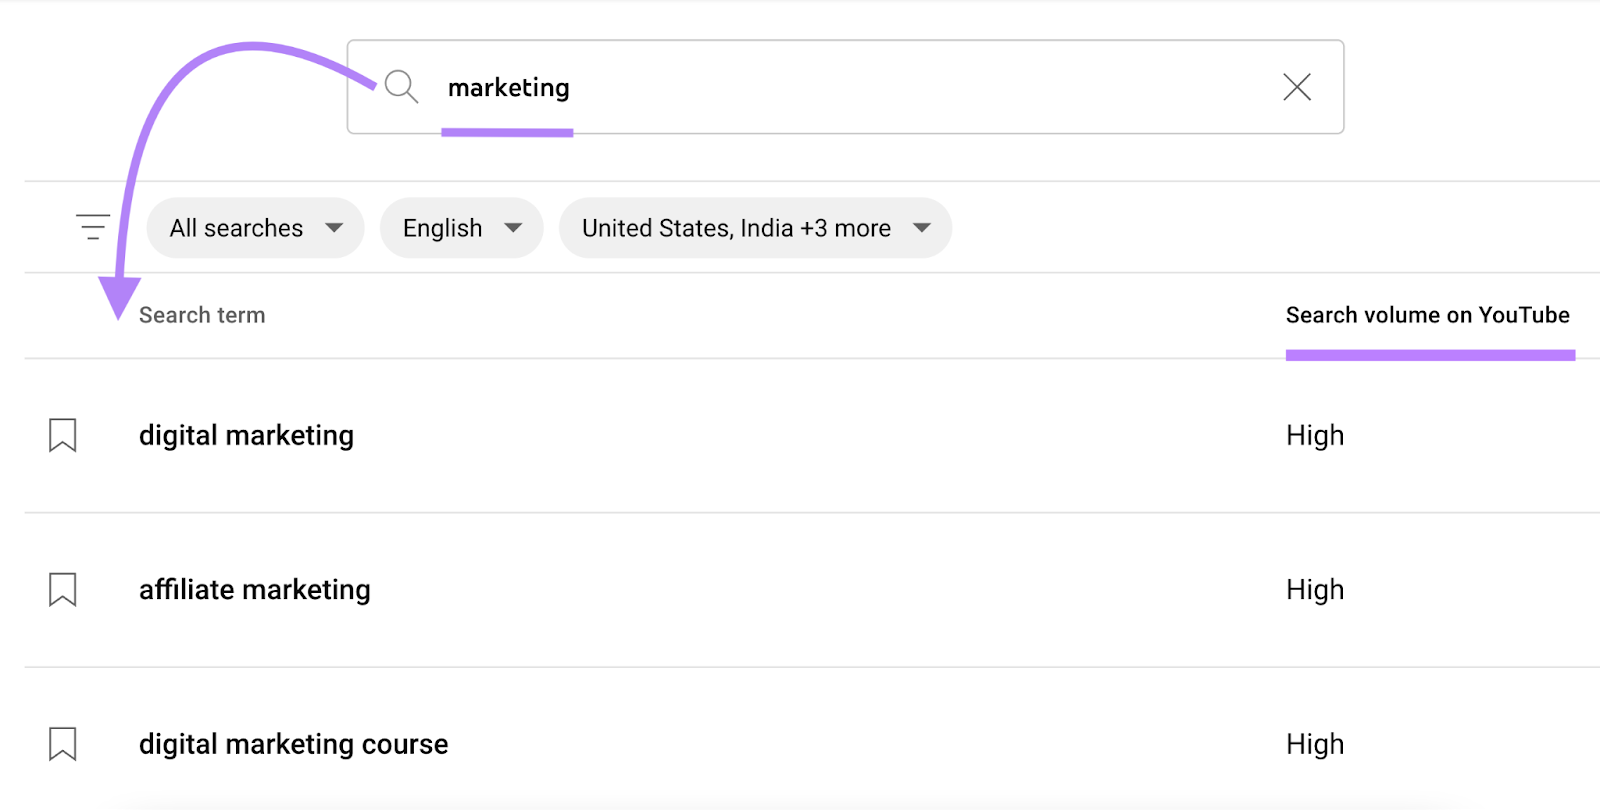 related keywords for "marketing" including their search volume